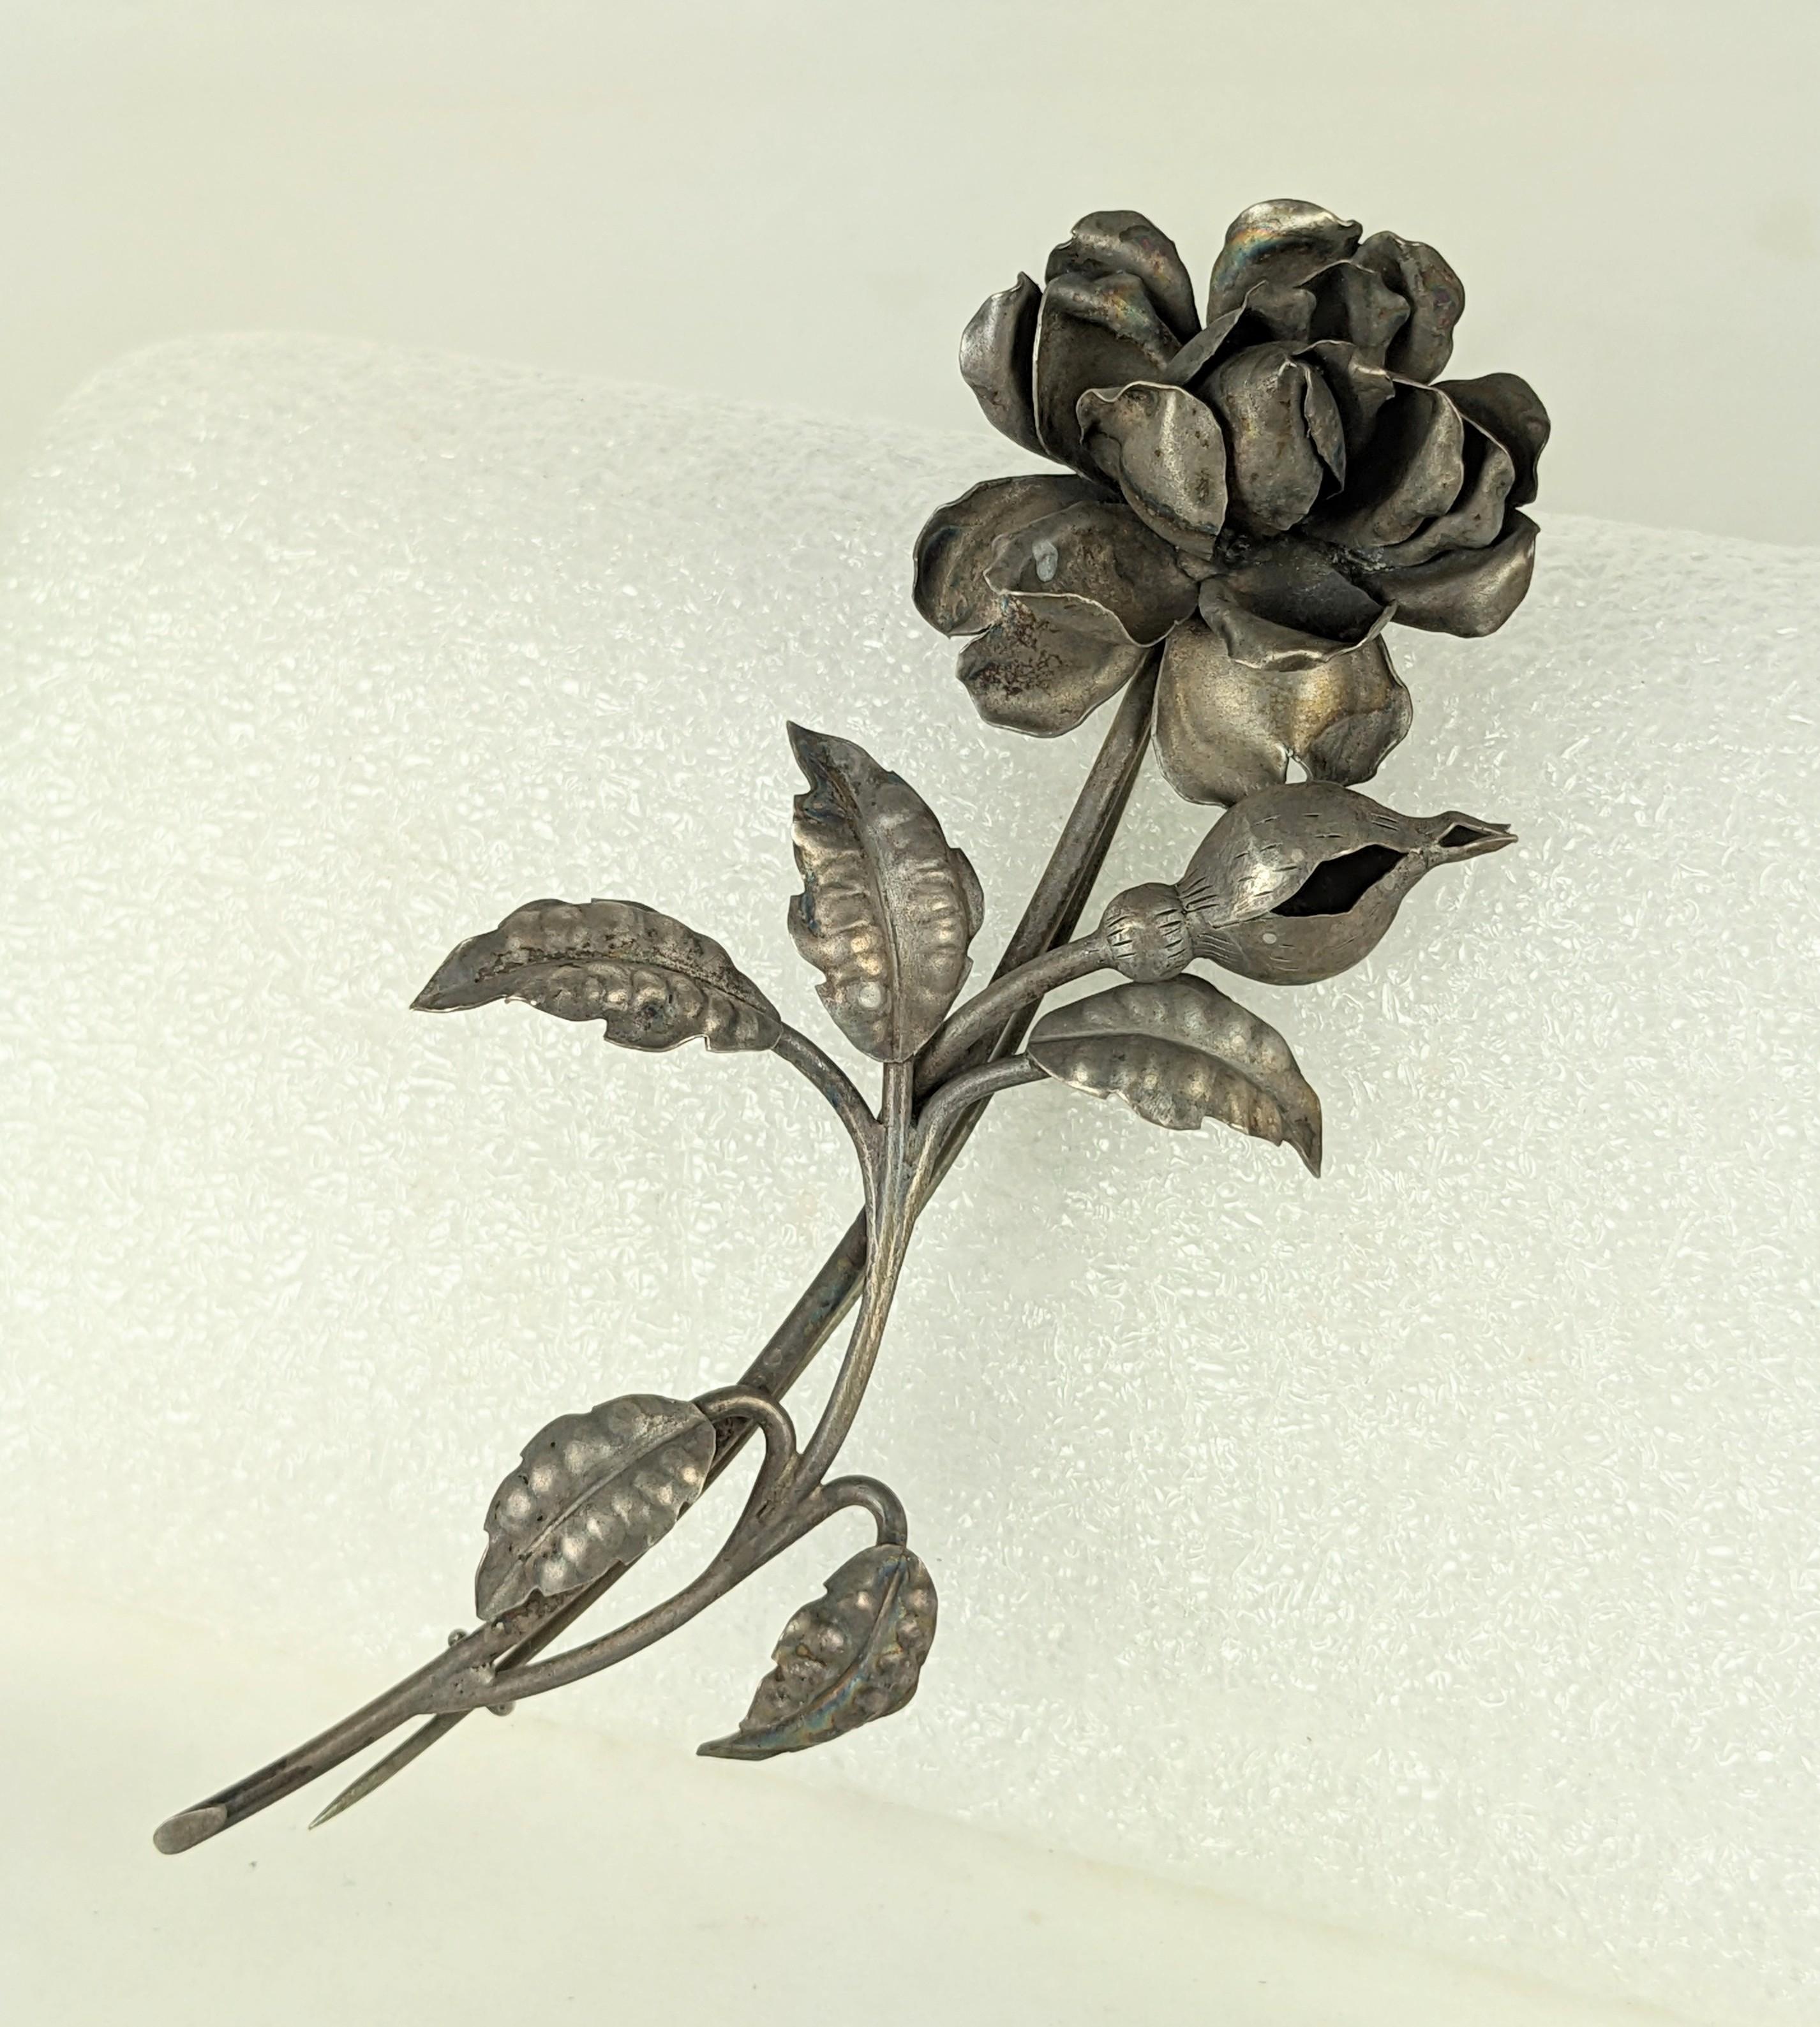 Massive 19th Century Silver Rose, hand crafted with extraordinary detailing by a fine jeweler of the period. 4.75